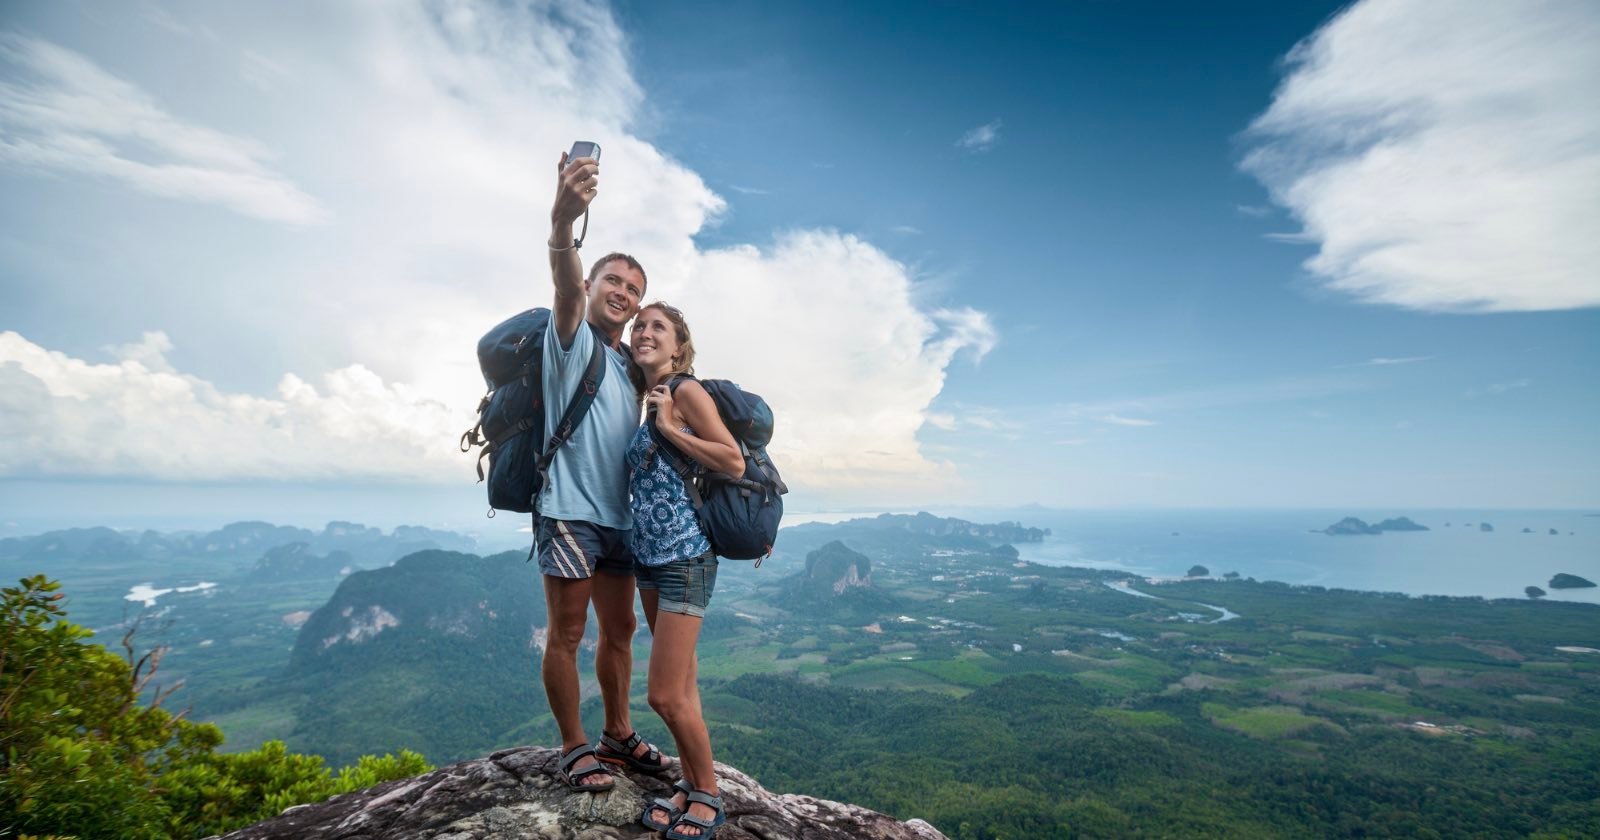  selfie-related deaths are public health risk age social 